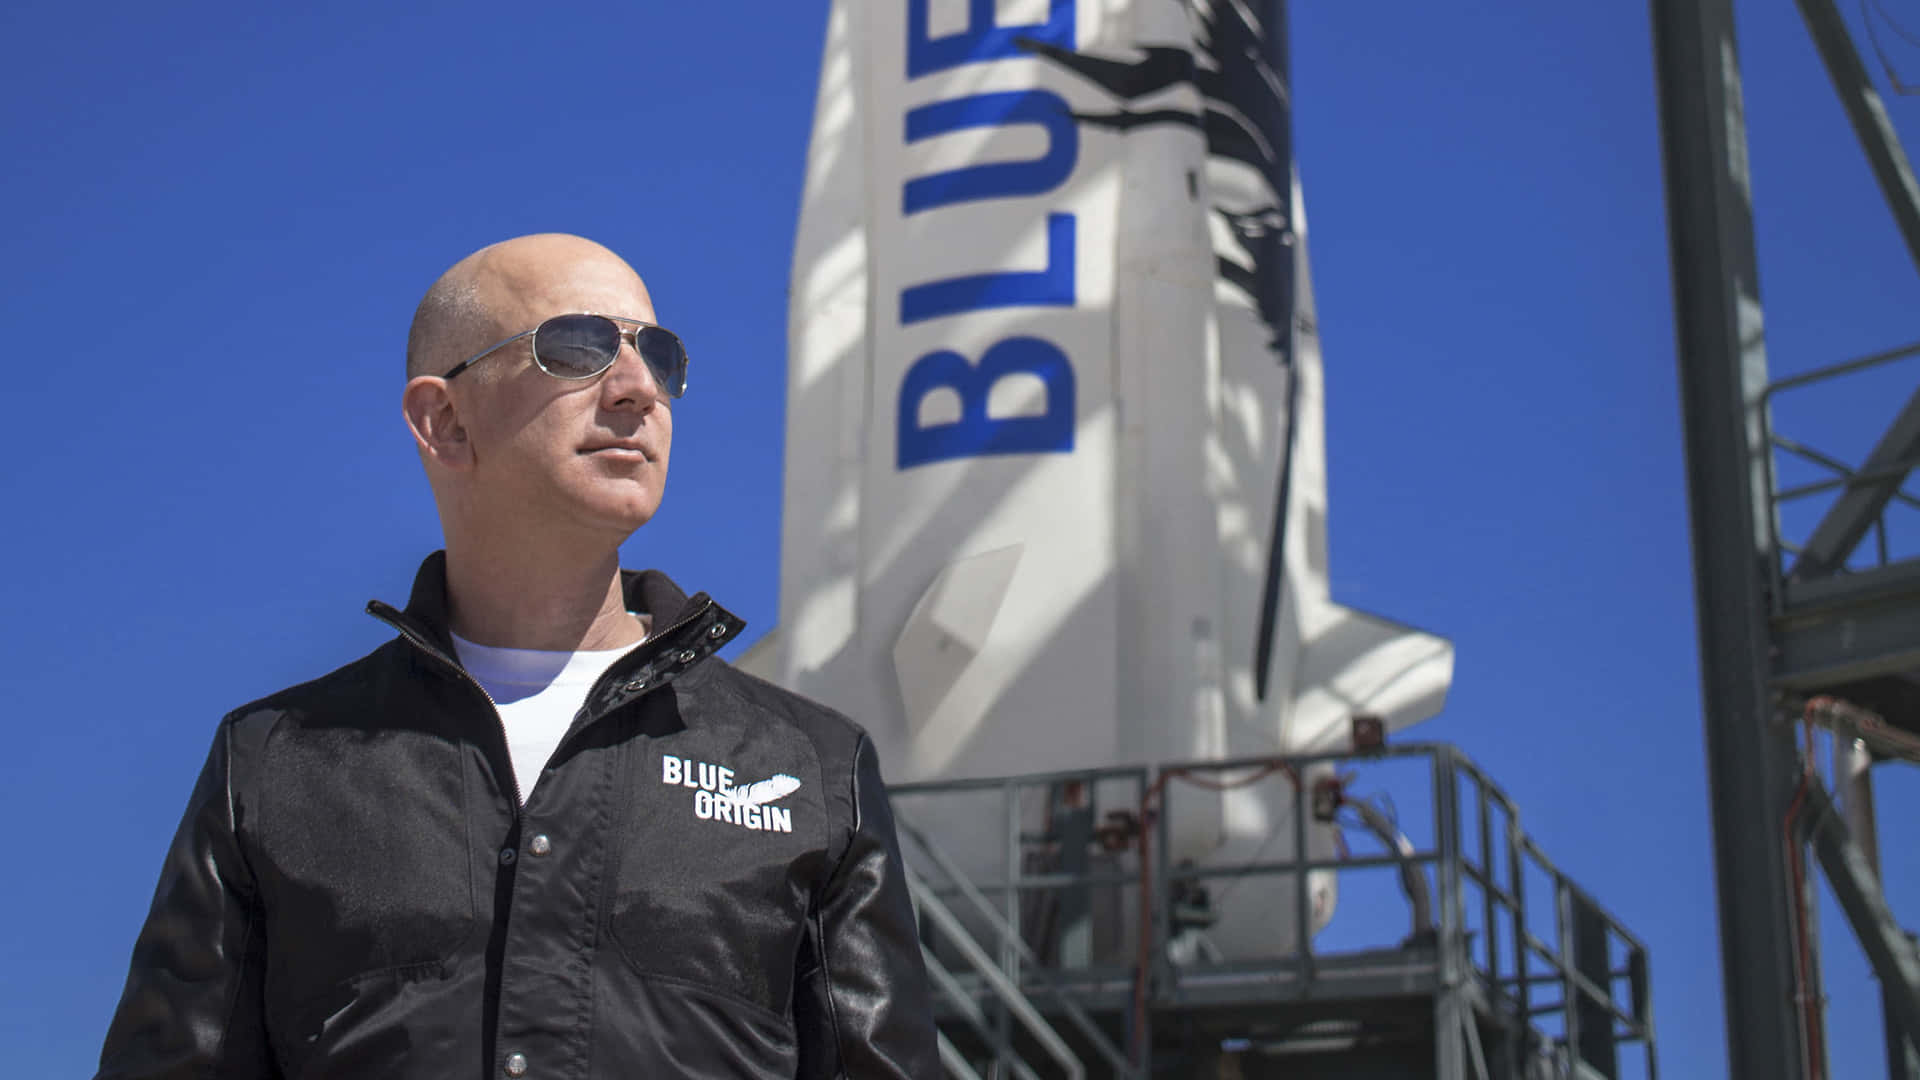 Jeff Bezos Smiling and Posing for a Photo